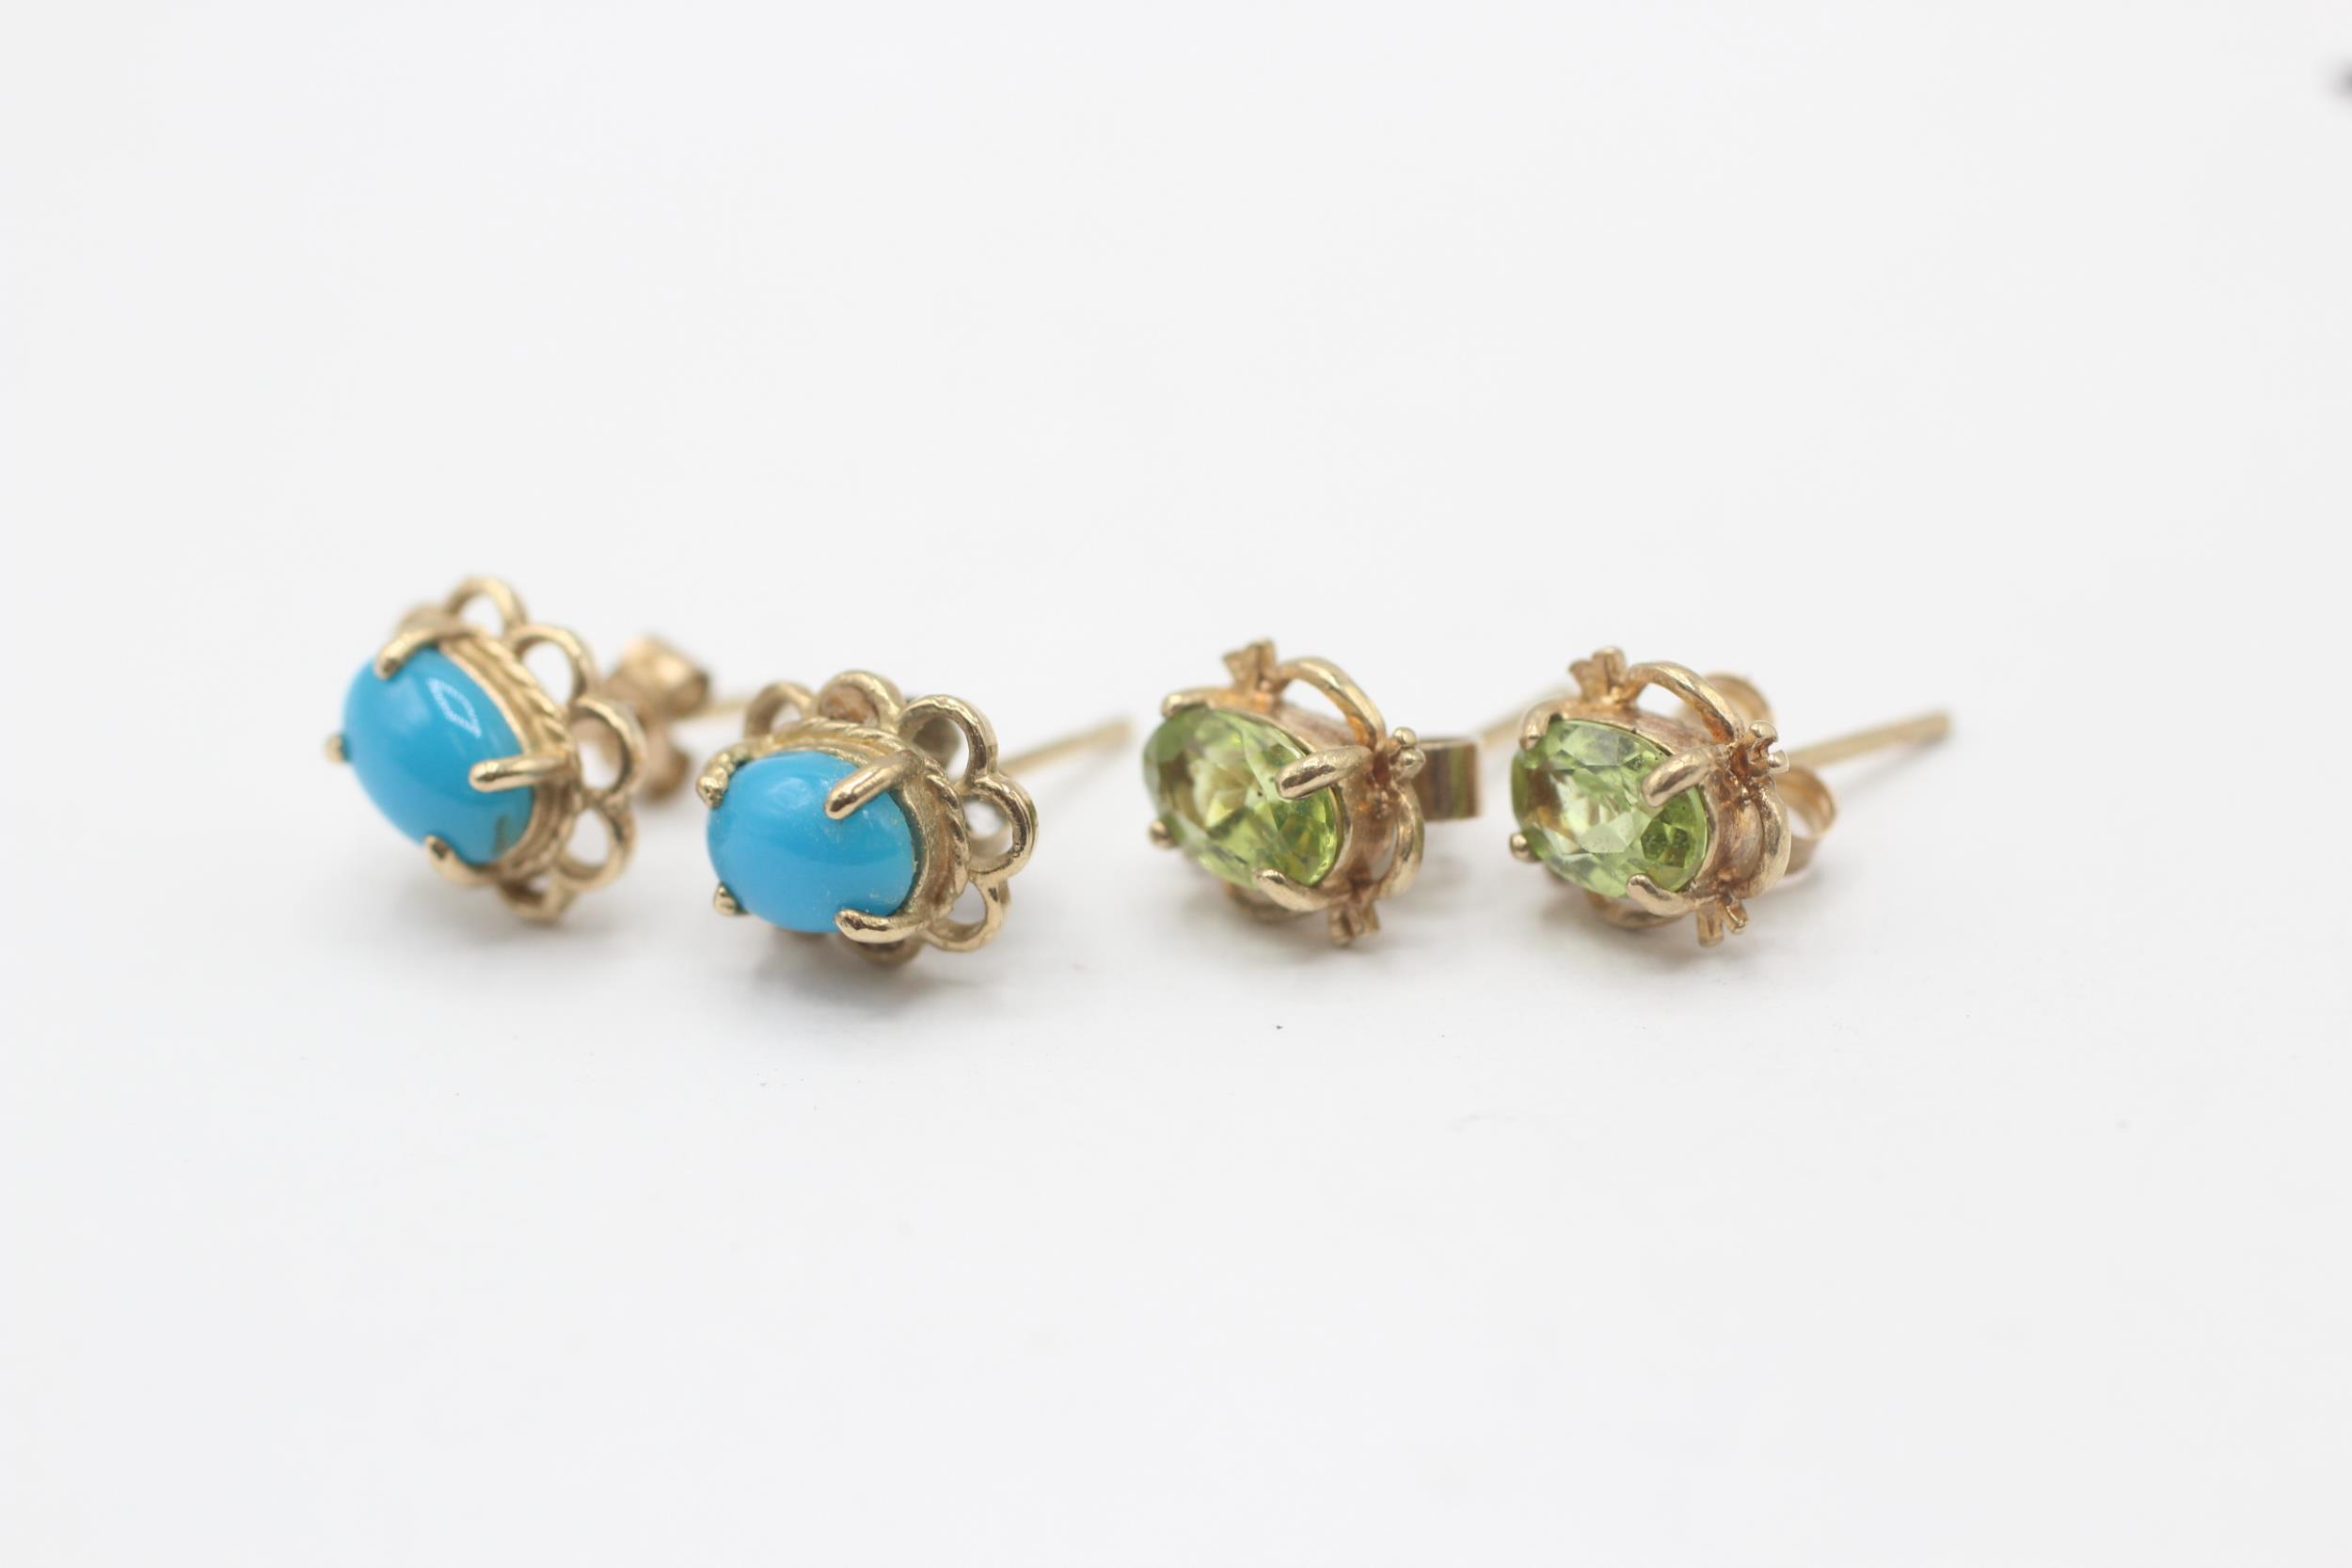 2 x 9ct gold peridot and blue gemstone stud earrings - Image 2 of 4